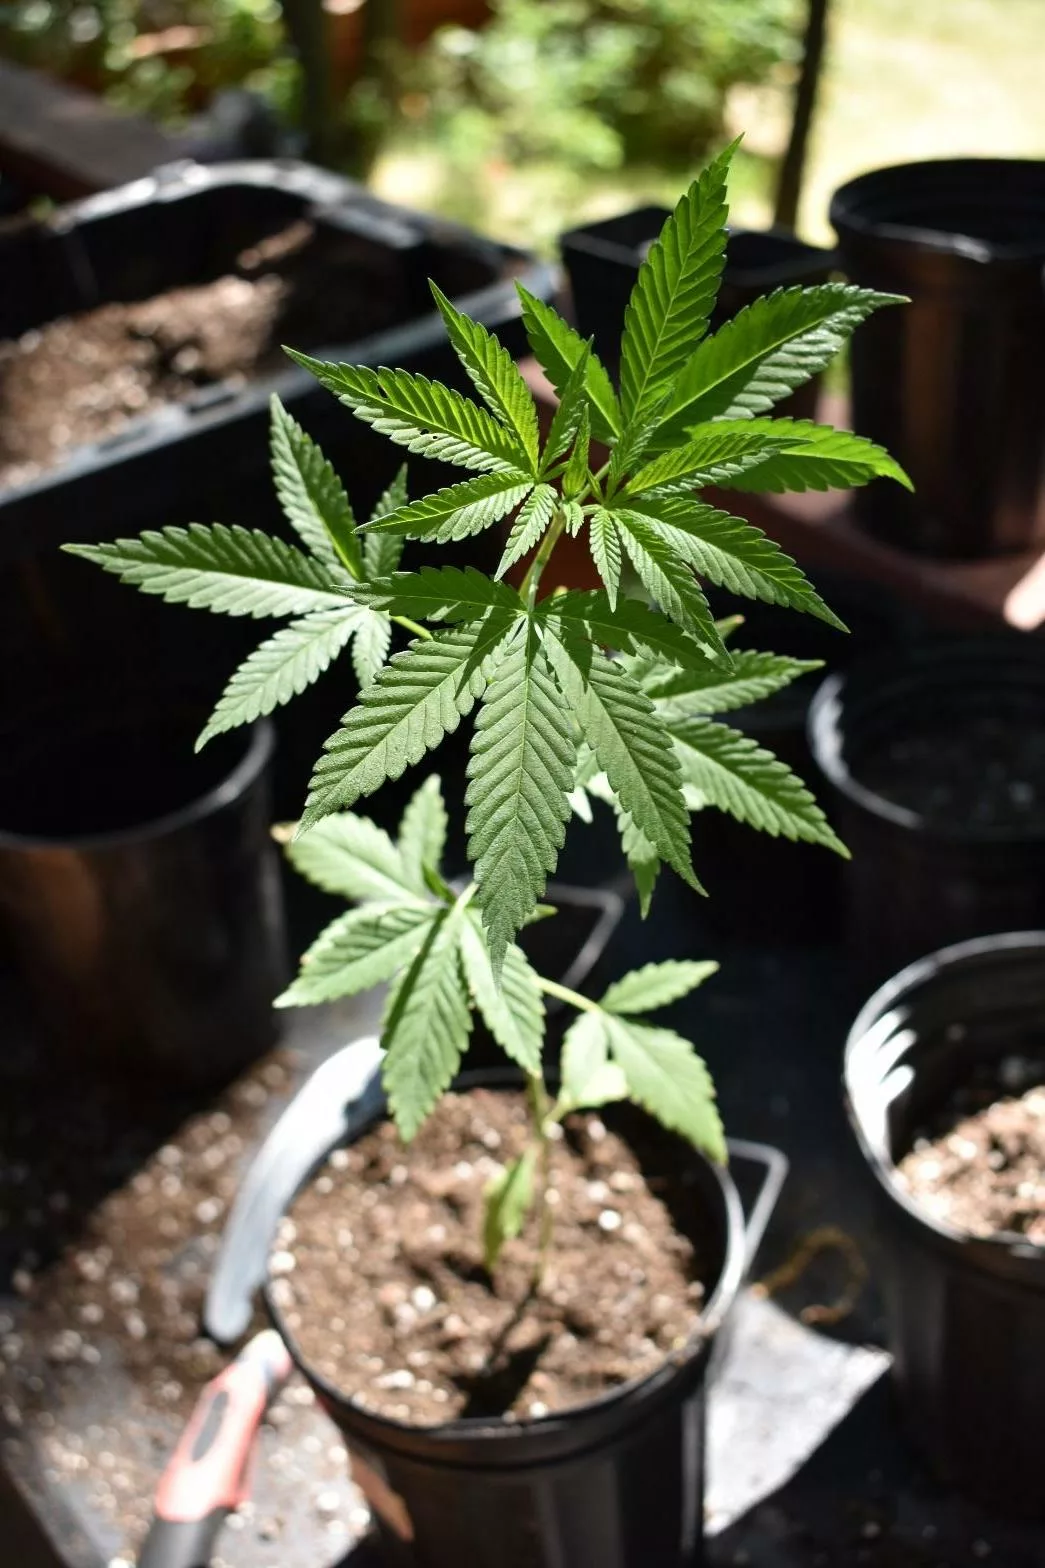 Fan leaves on a young cannabis plant with potted soil